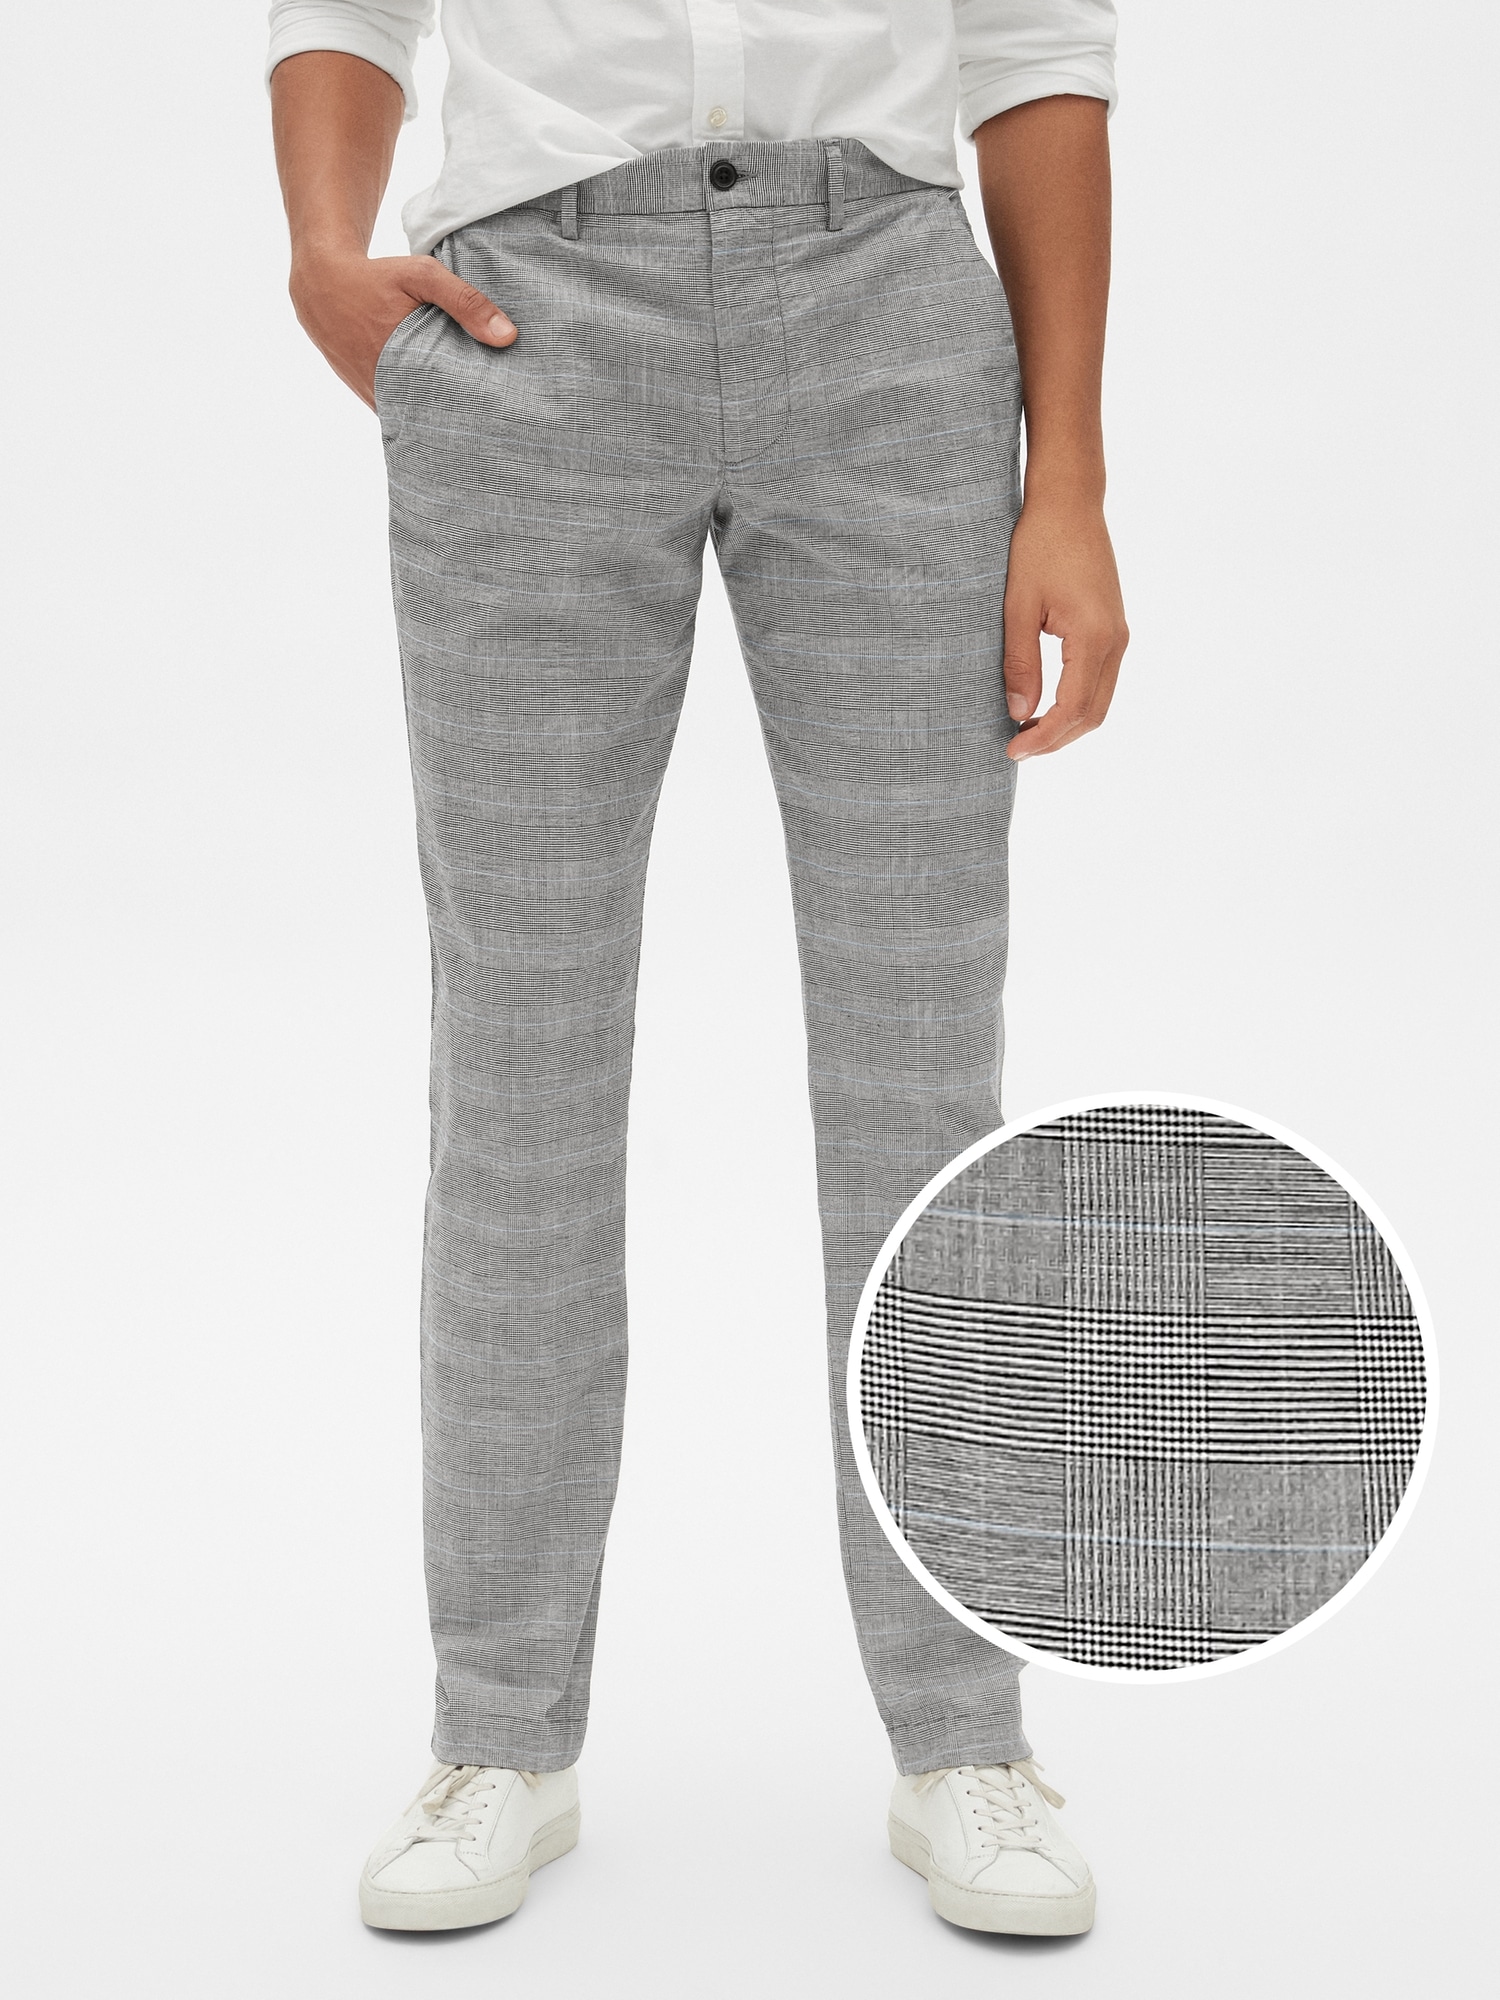 Plaid Pants in Slim Fit with GapFlex